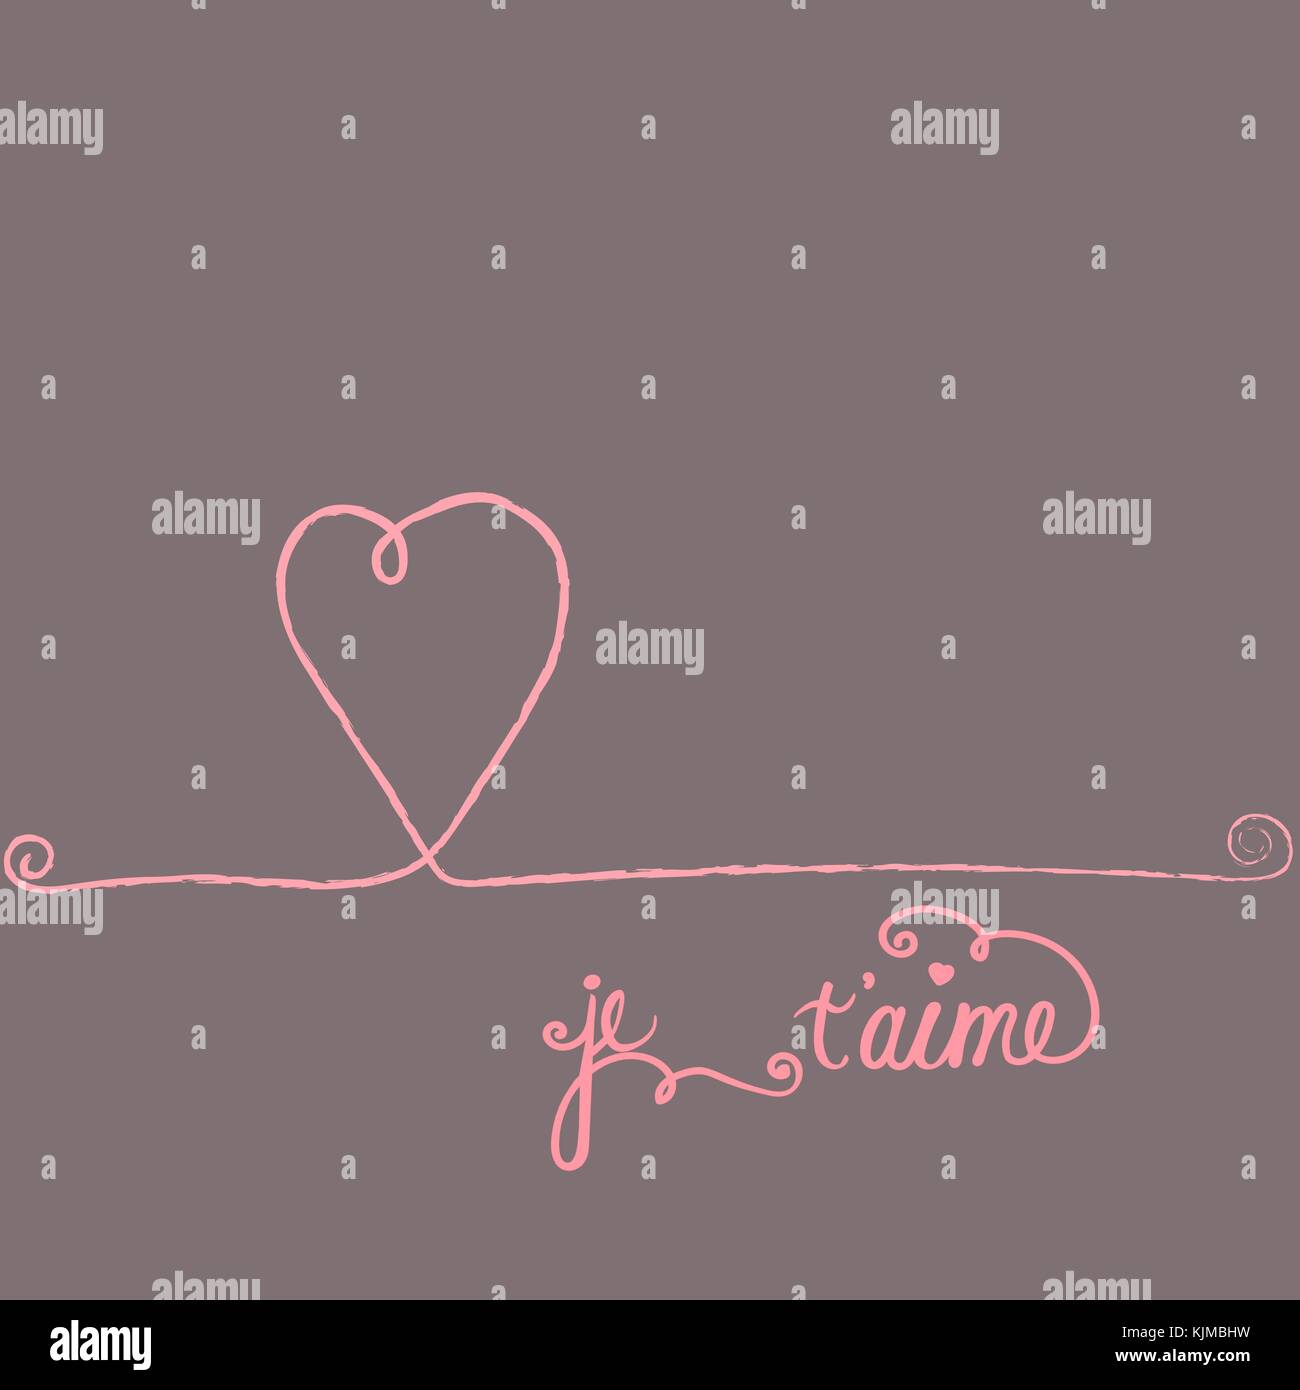 Freehand Doodle Vector Greeting Card Je T'aime Lettering in French I Love You. Heart Decorative Swirl Details. Creative Unique Design. Copy Space Temp Stock Vector